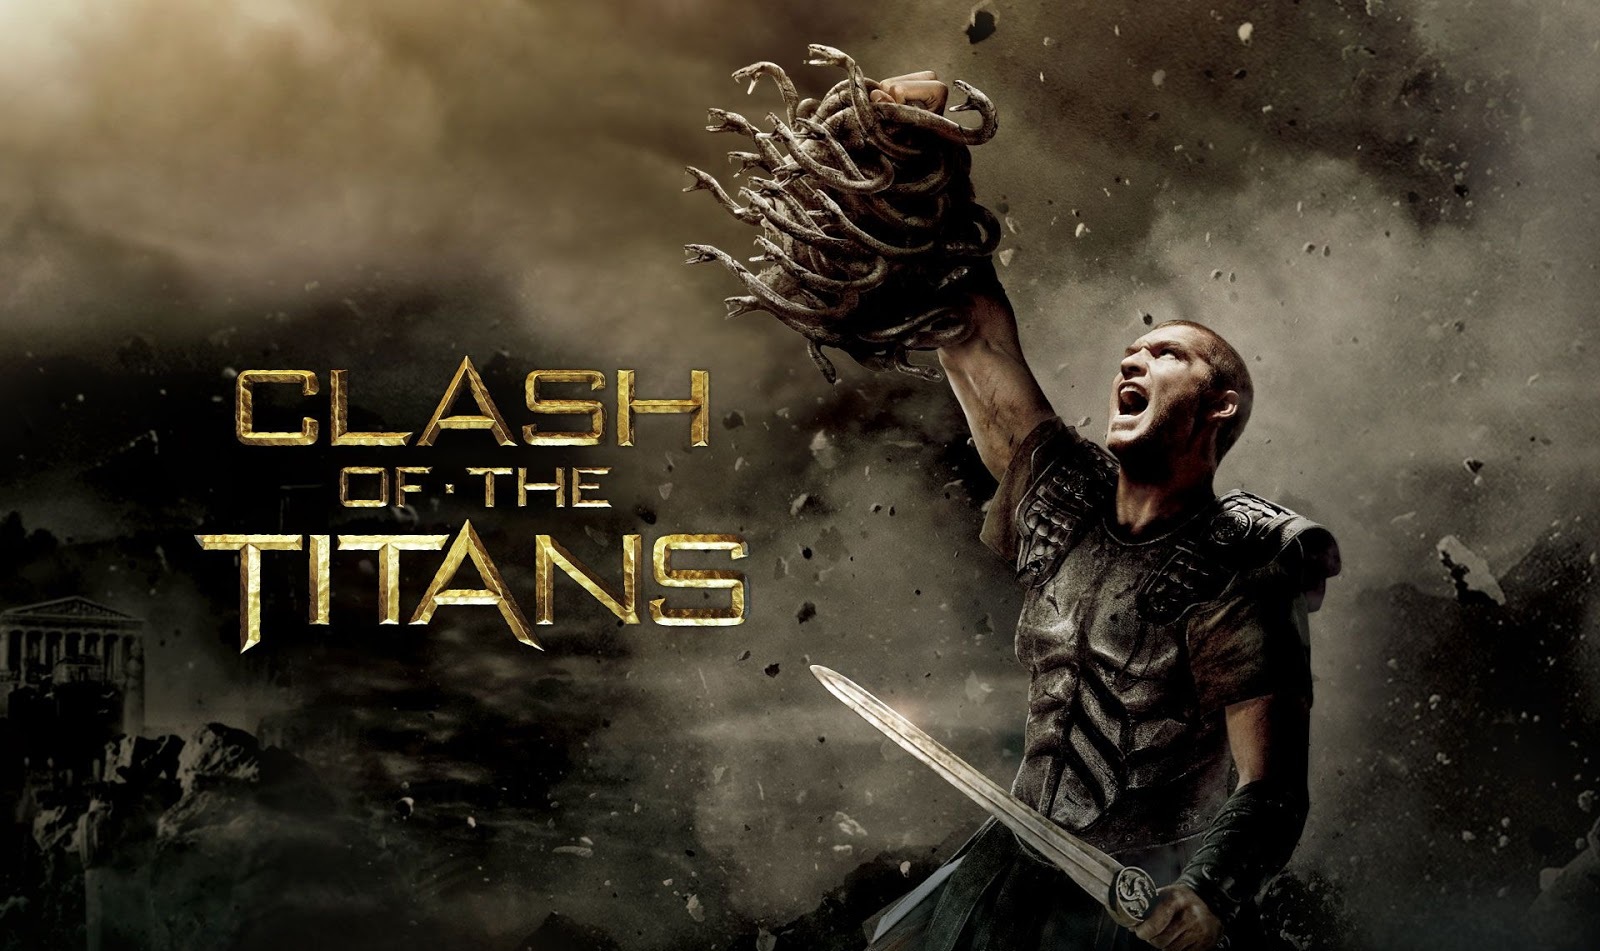 Review of Clash of the Titans: Old vs New